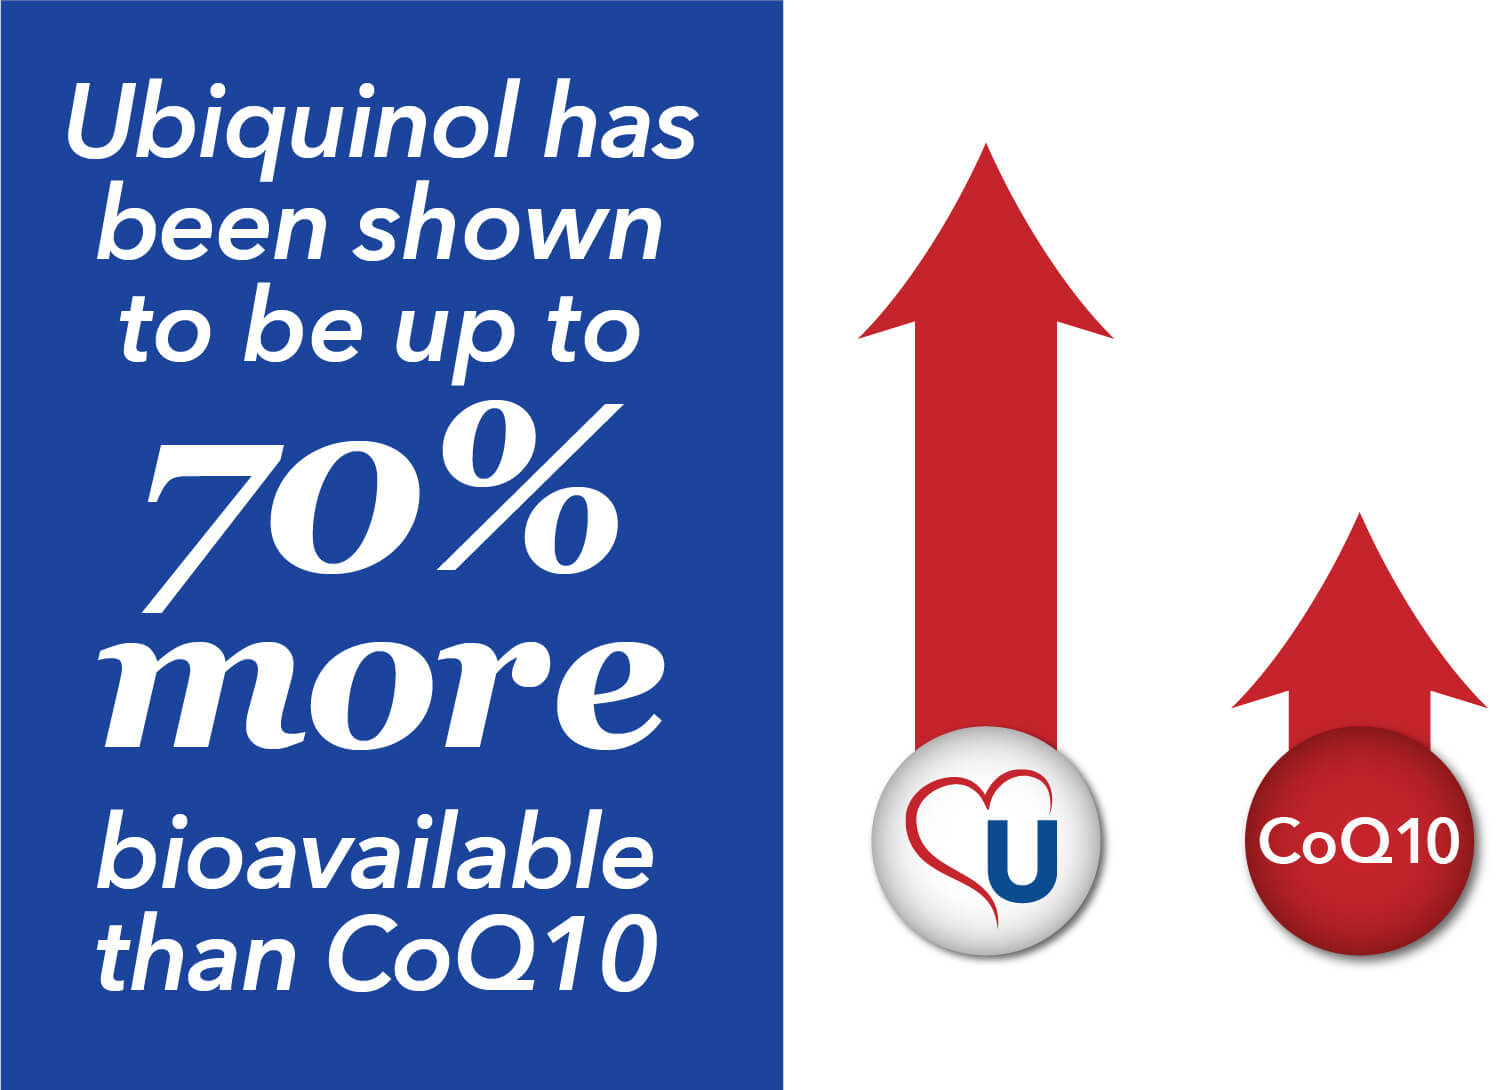 Ubiquinol has been shown to be up to 70% more bioavailable than CoQ10